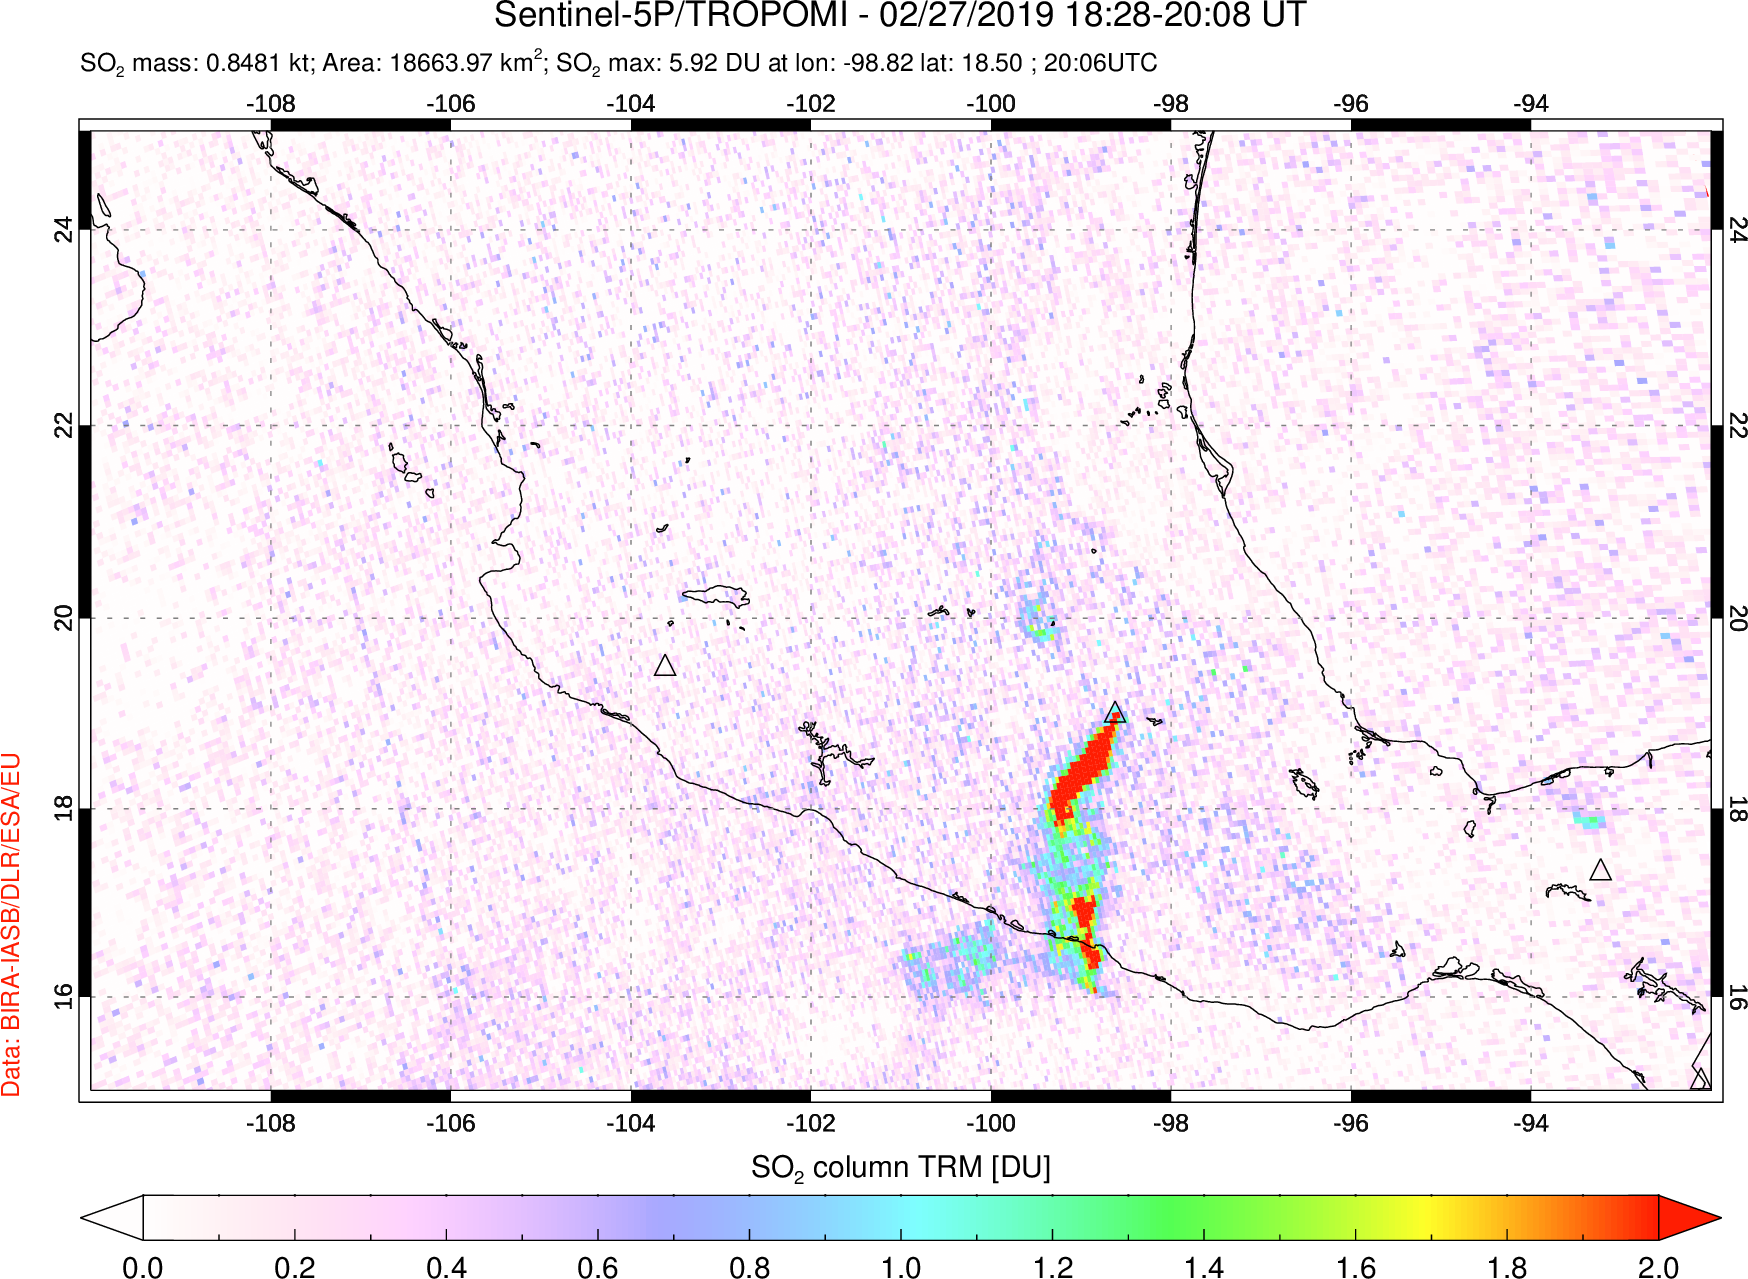 A sulfur dioxide image over Mexico on Feb 27, 2019.